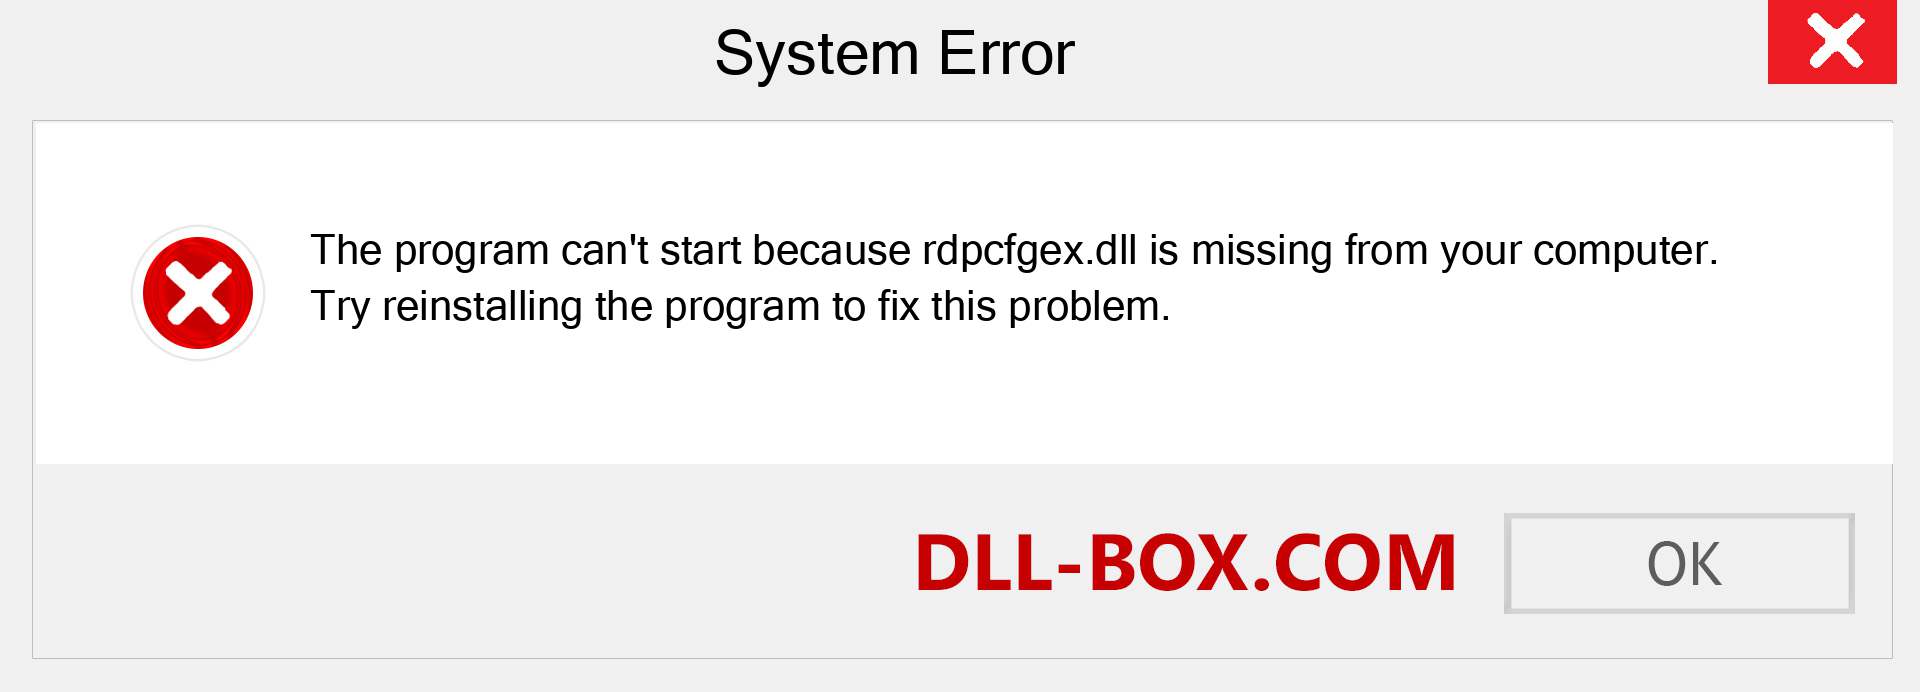  rdpcfgex.dll file is missing?. Download for Windows 7, 8, 10 - Fix  rdpcfgex dll Missing Error on Windows, photos, images